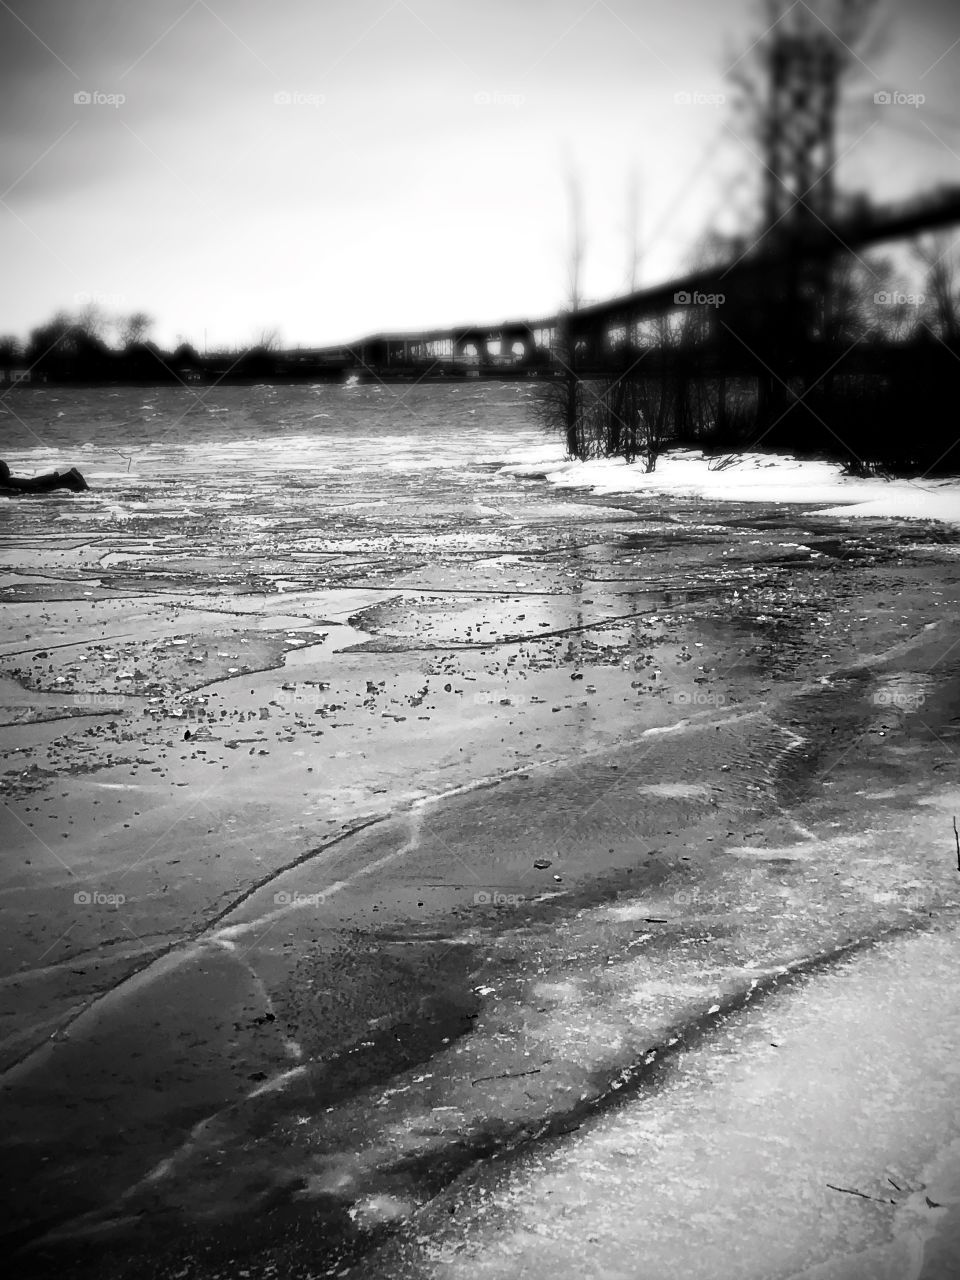 Ice and snow, black and white. Delivers an artistic approach to this dreary winter day.  